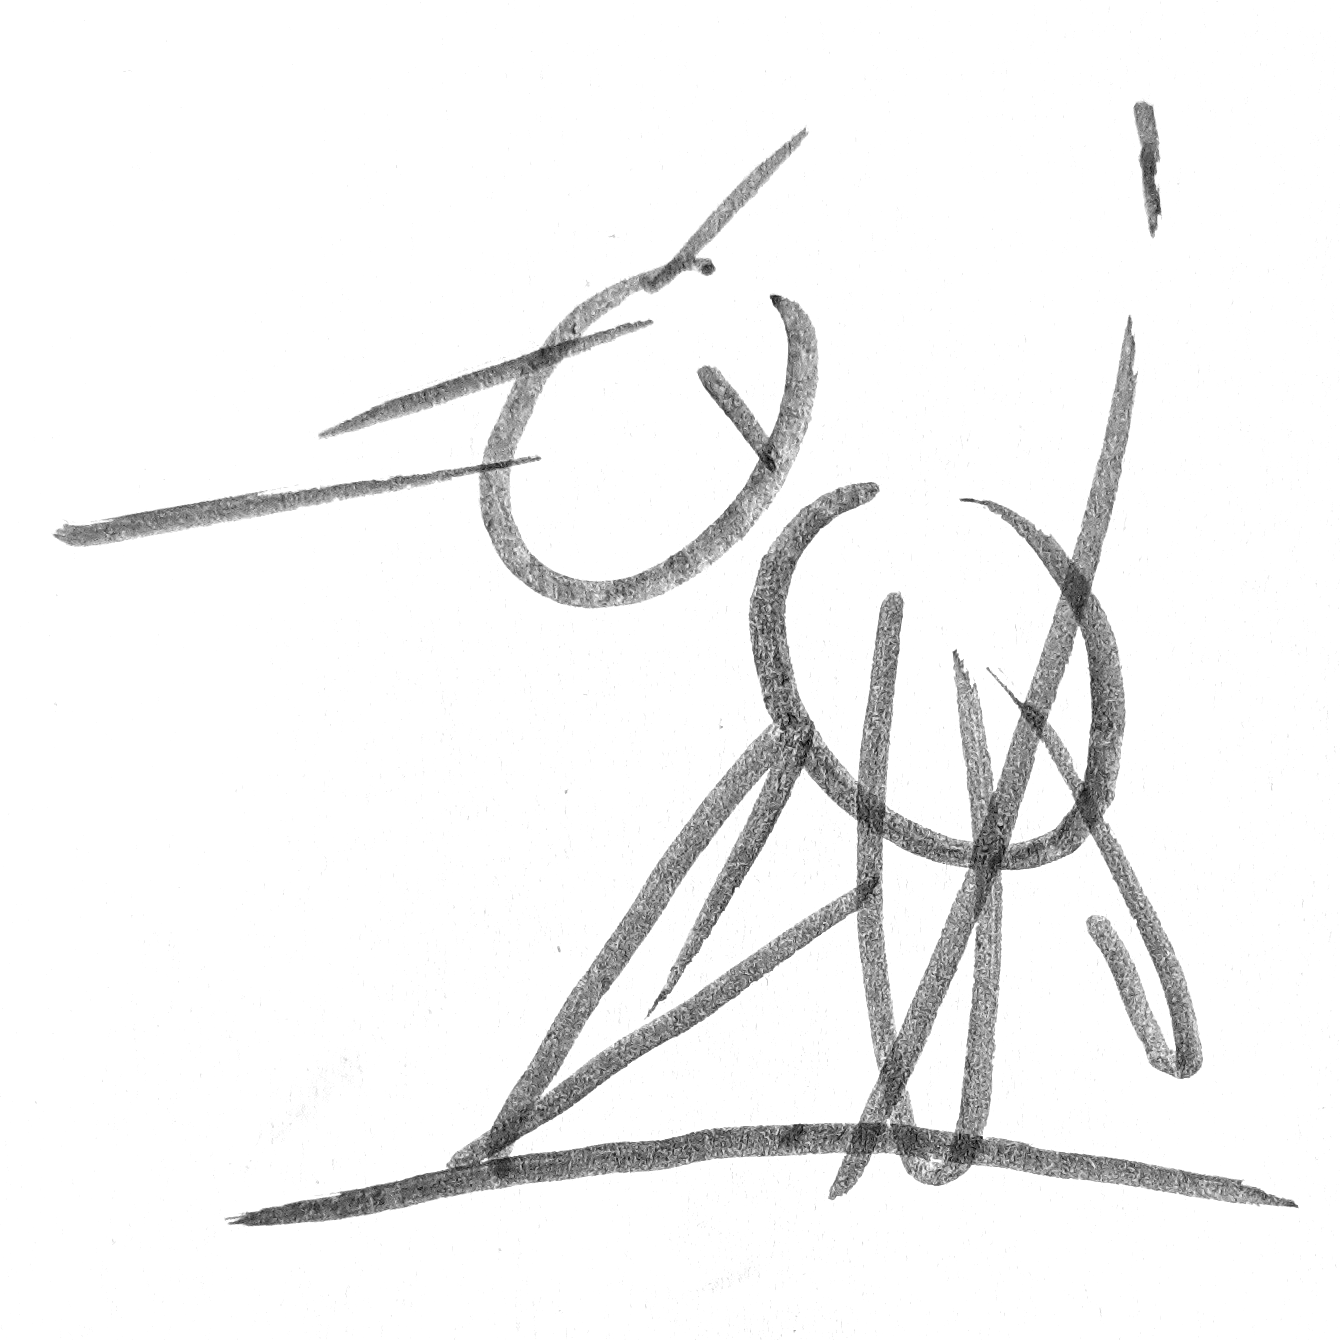 Rough outline of Pteranodon